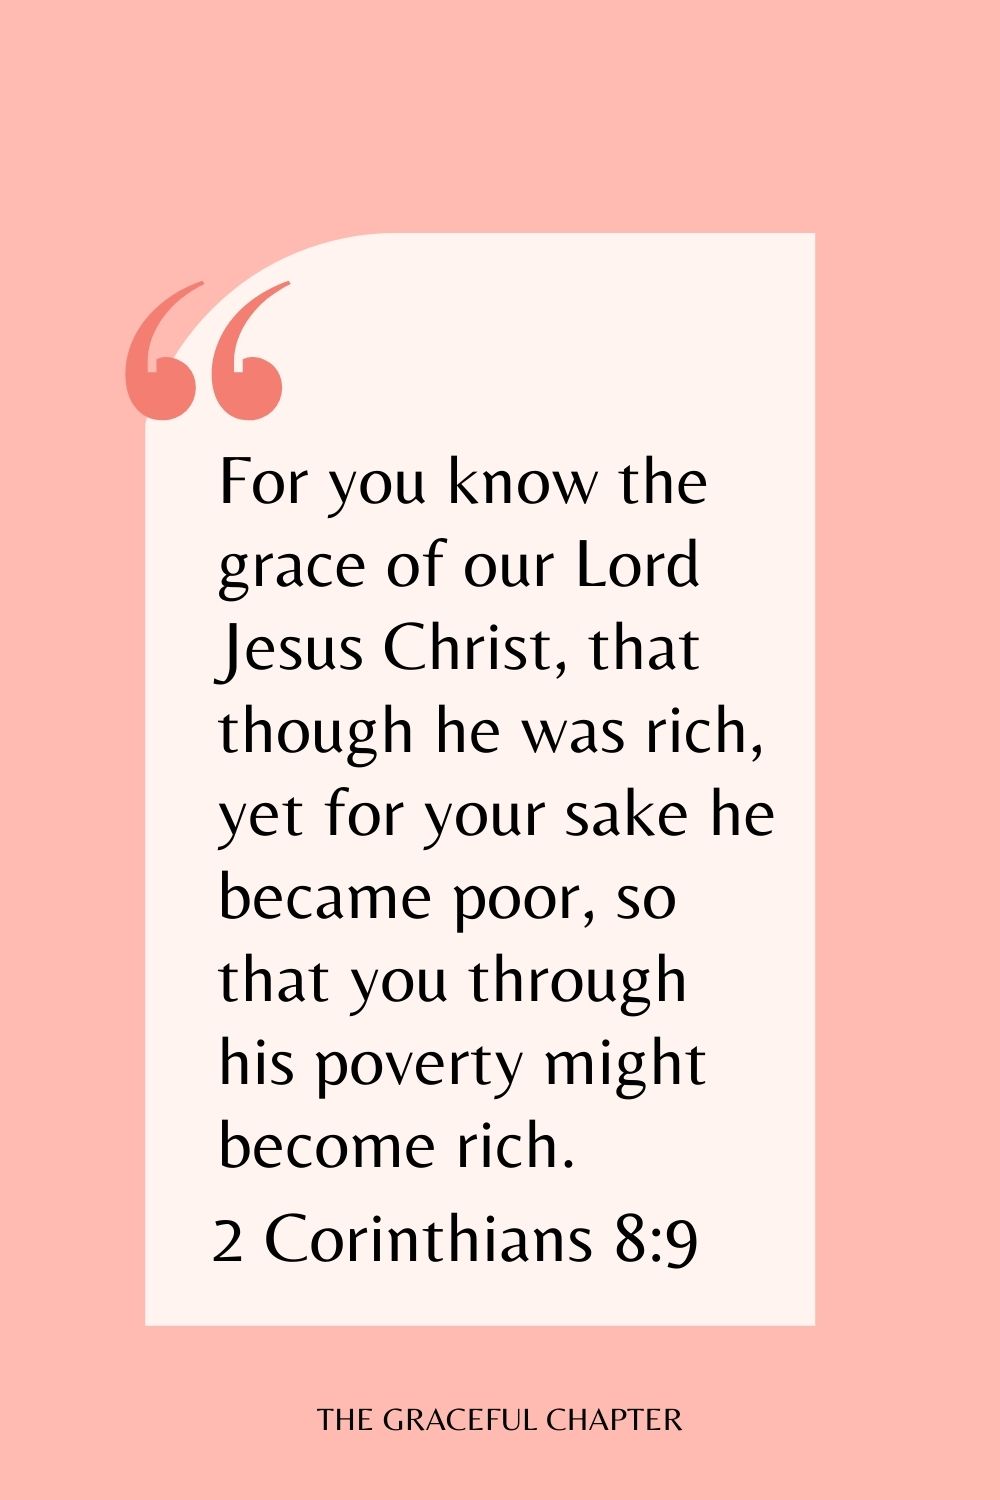 For you know the grace of our Lord Jesus Christ, that though he was rich, yet for your sake he became poor, so that you through his poverty might become rich. 2 Corinthians 8:9